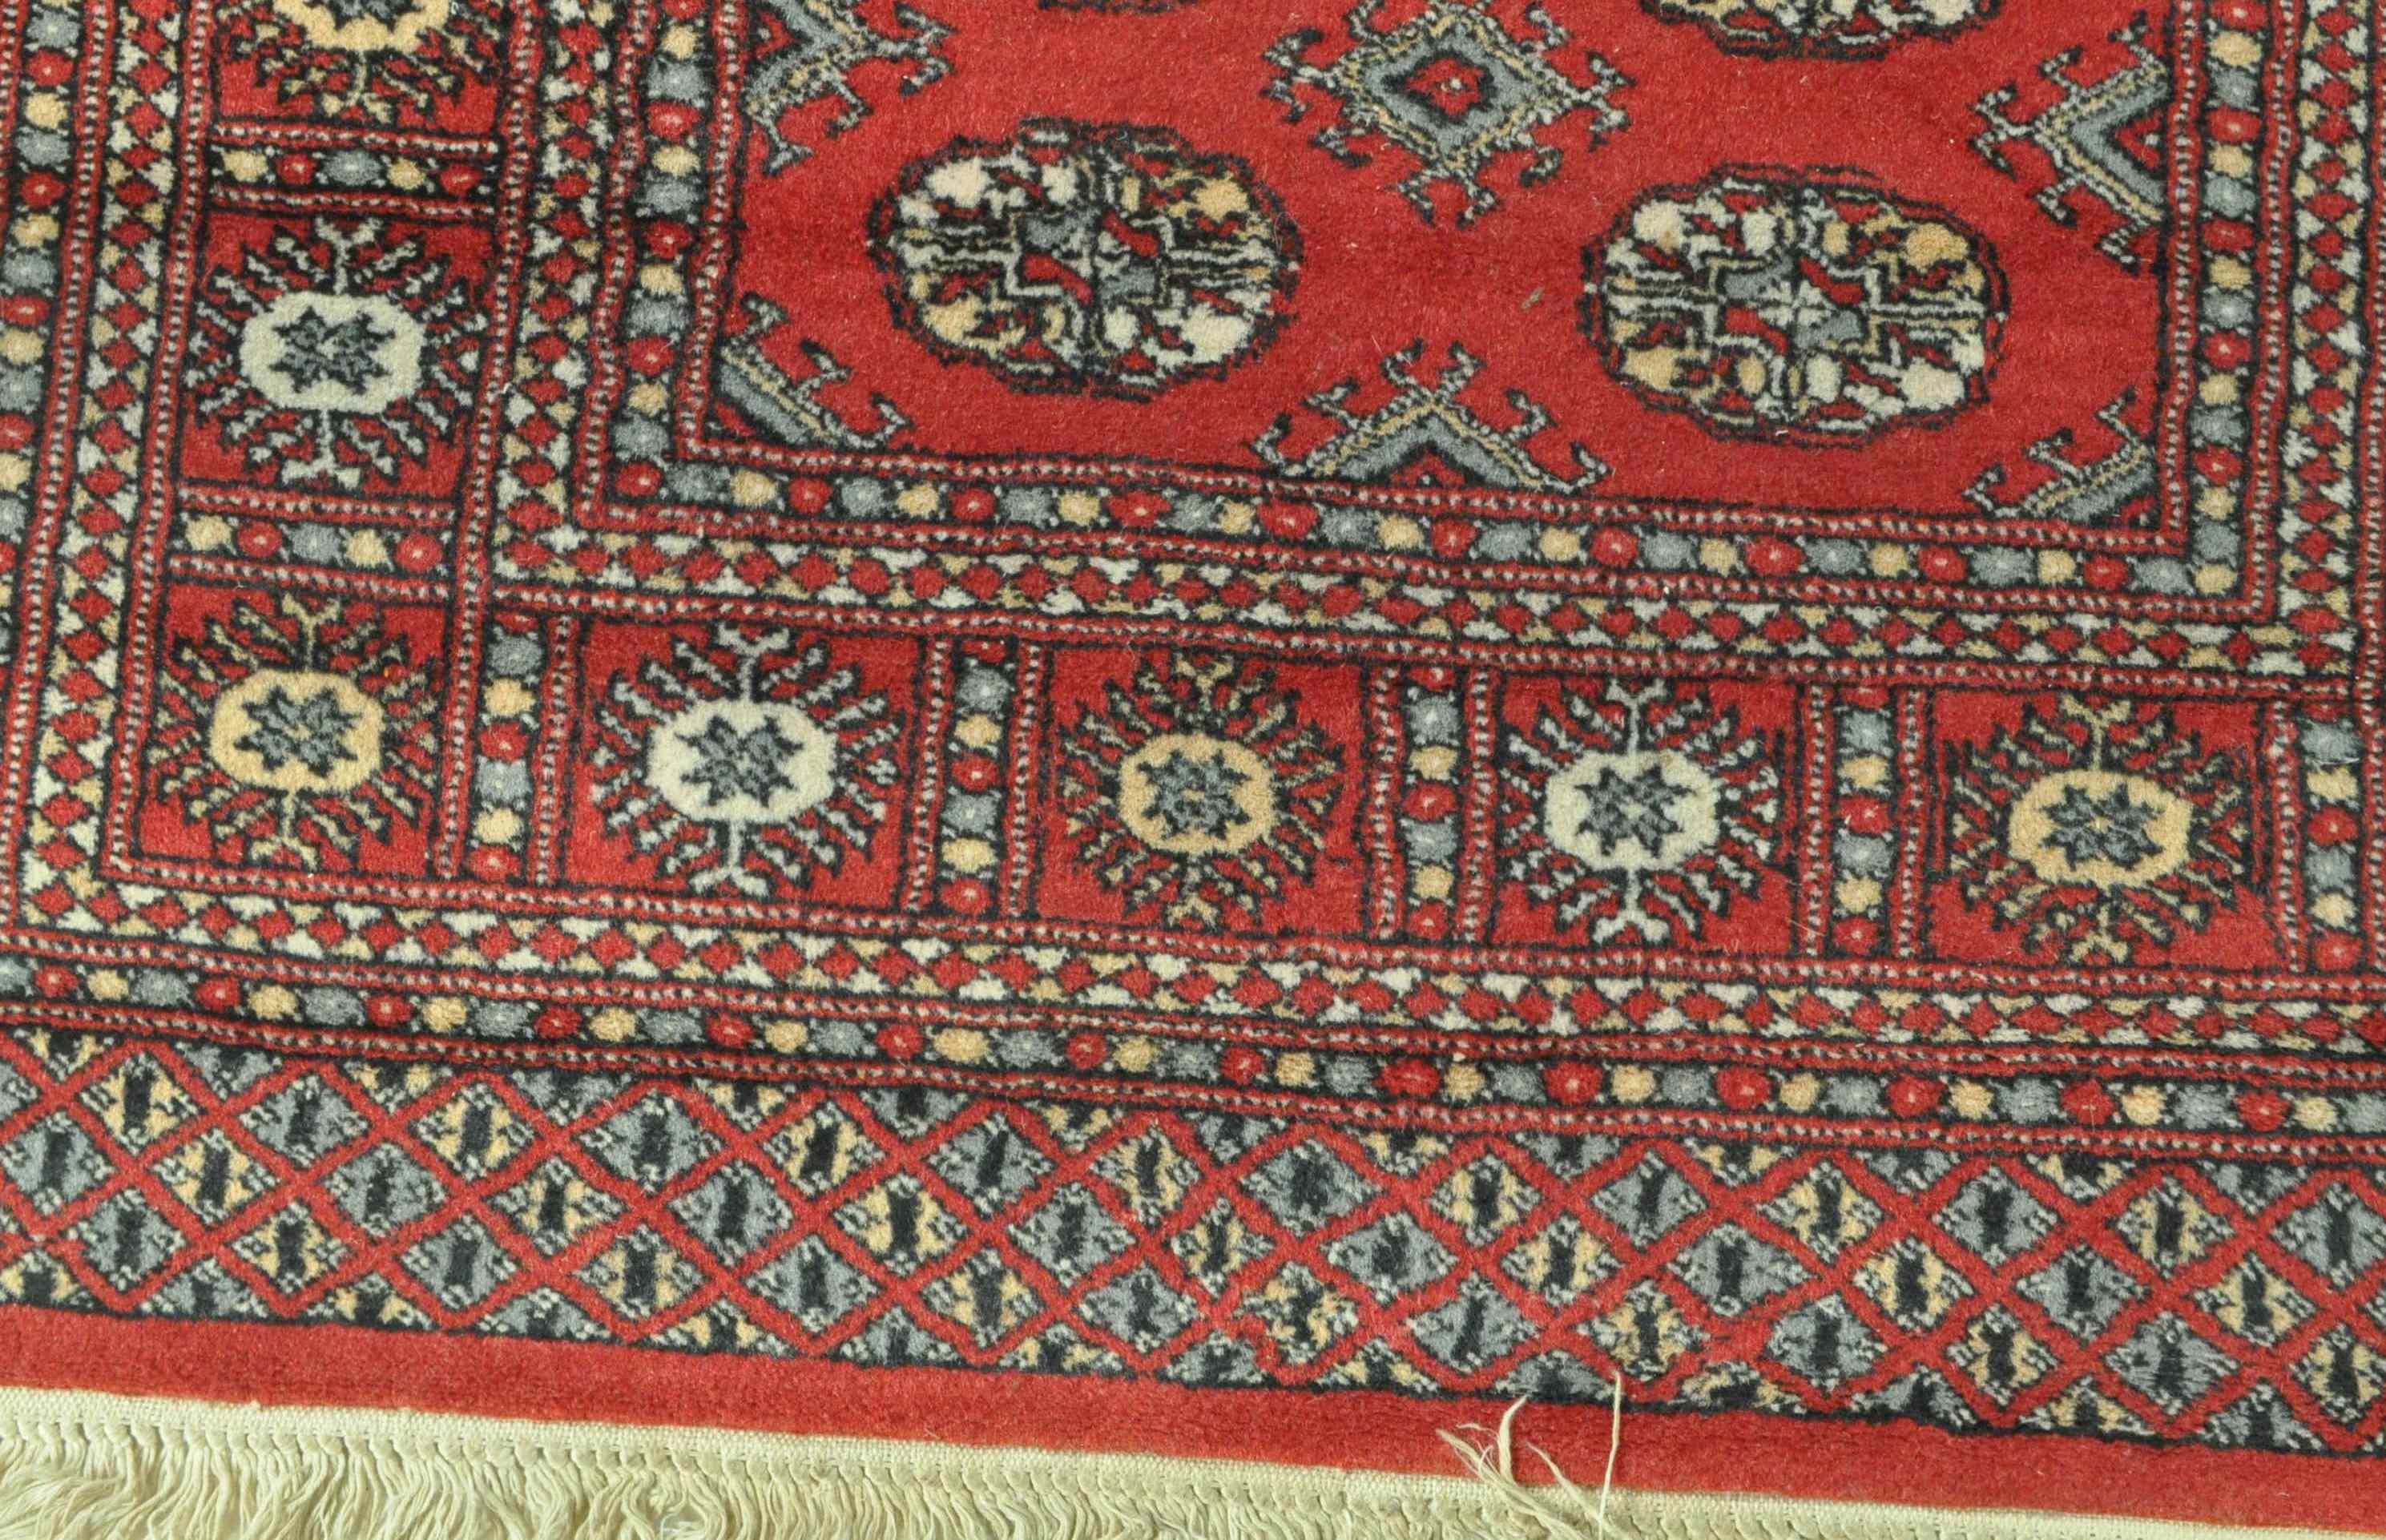 VINTAGE RED GROUND FLOOR RUG WITH MEDALLION AND PATTREND DECORATION - Image 4 of 5